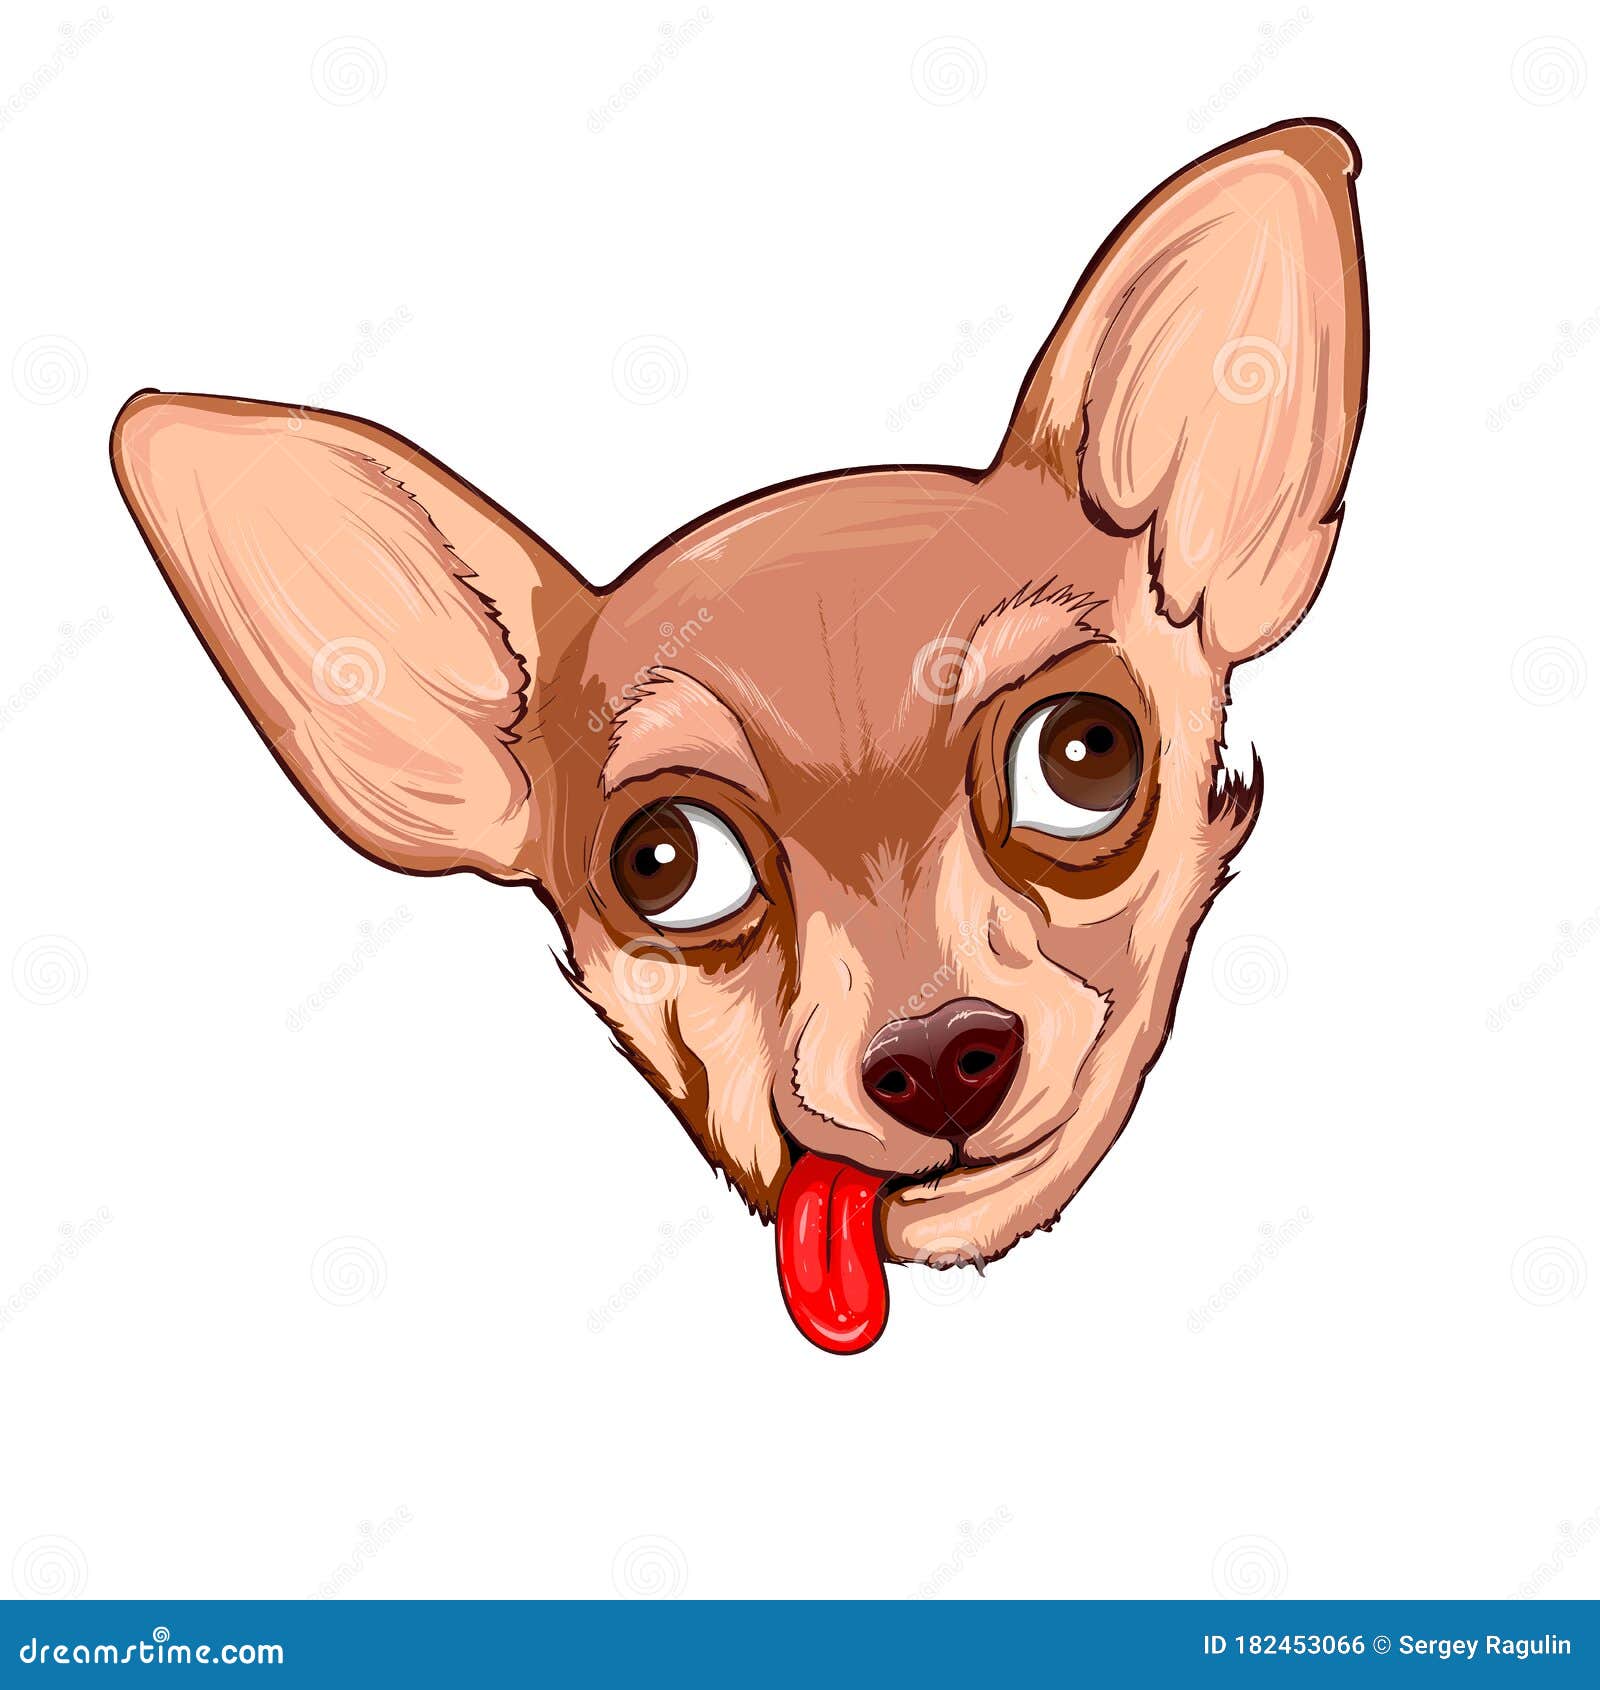 Chihuahua Dog, Head. Isolated Illustration. Cute Puppy Stock Vector